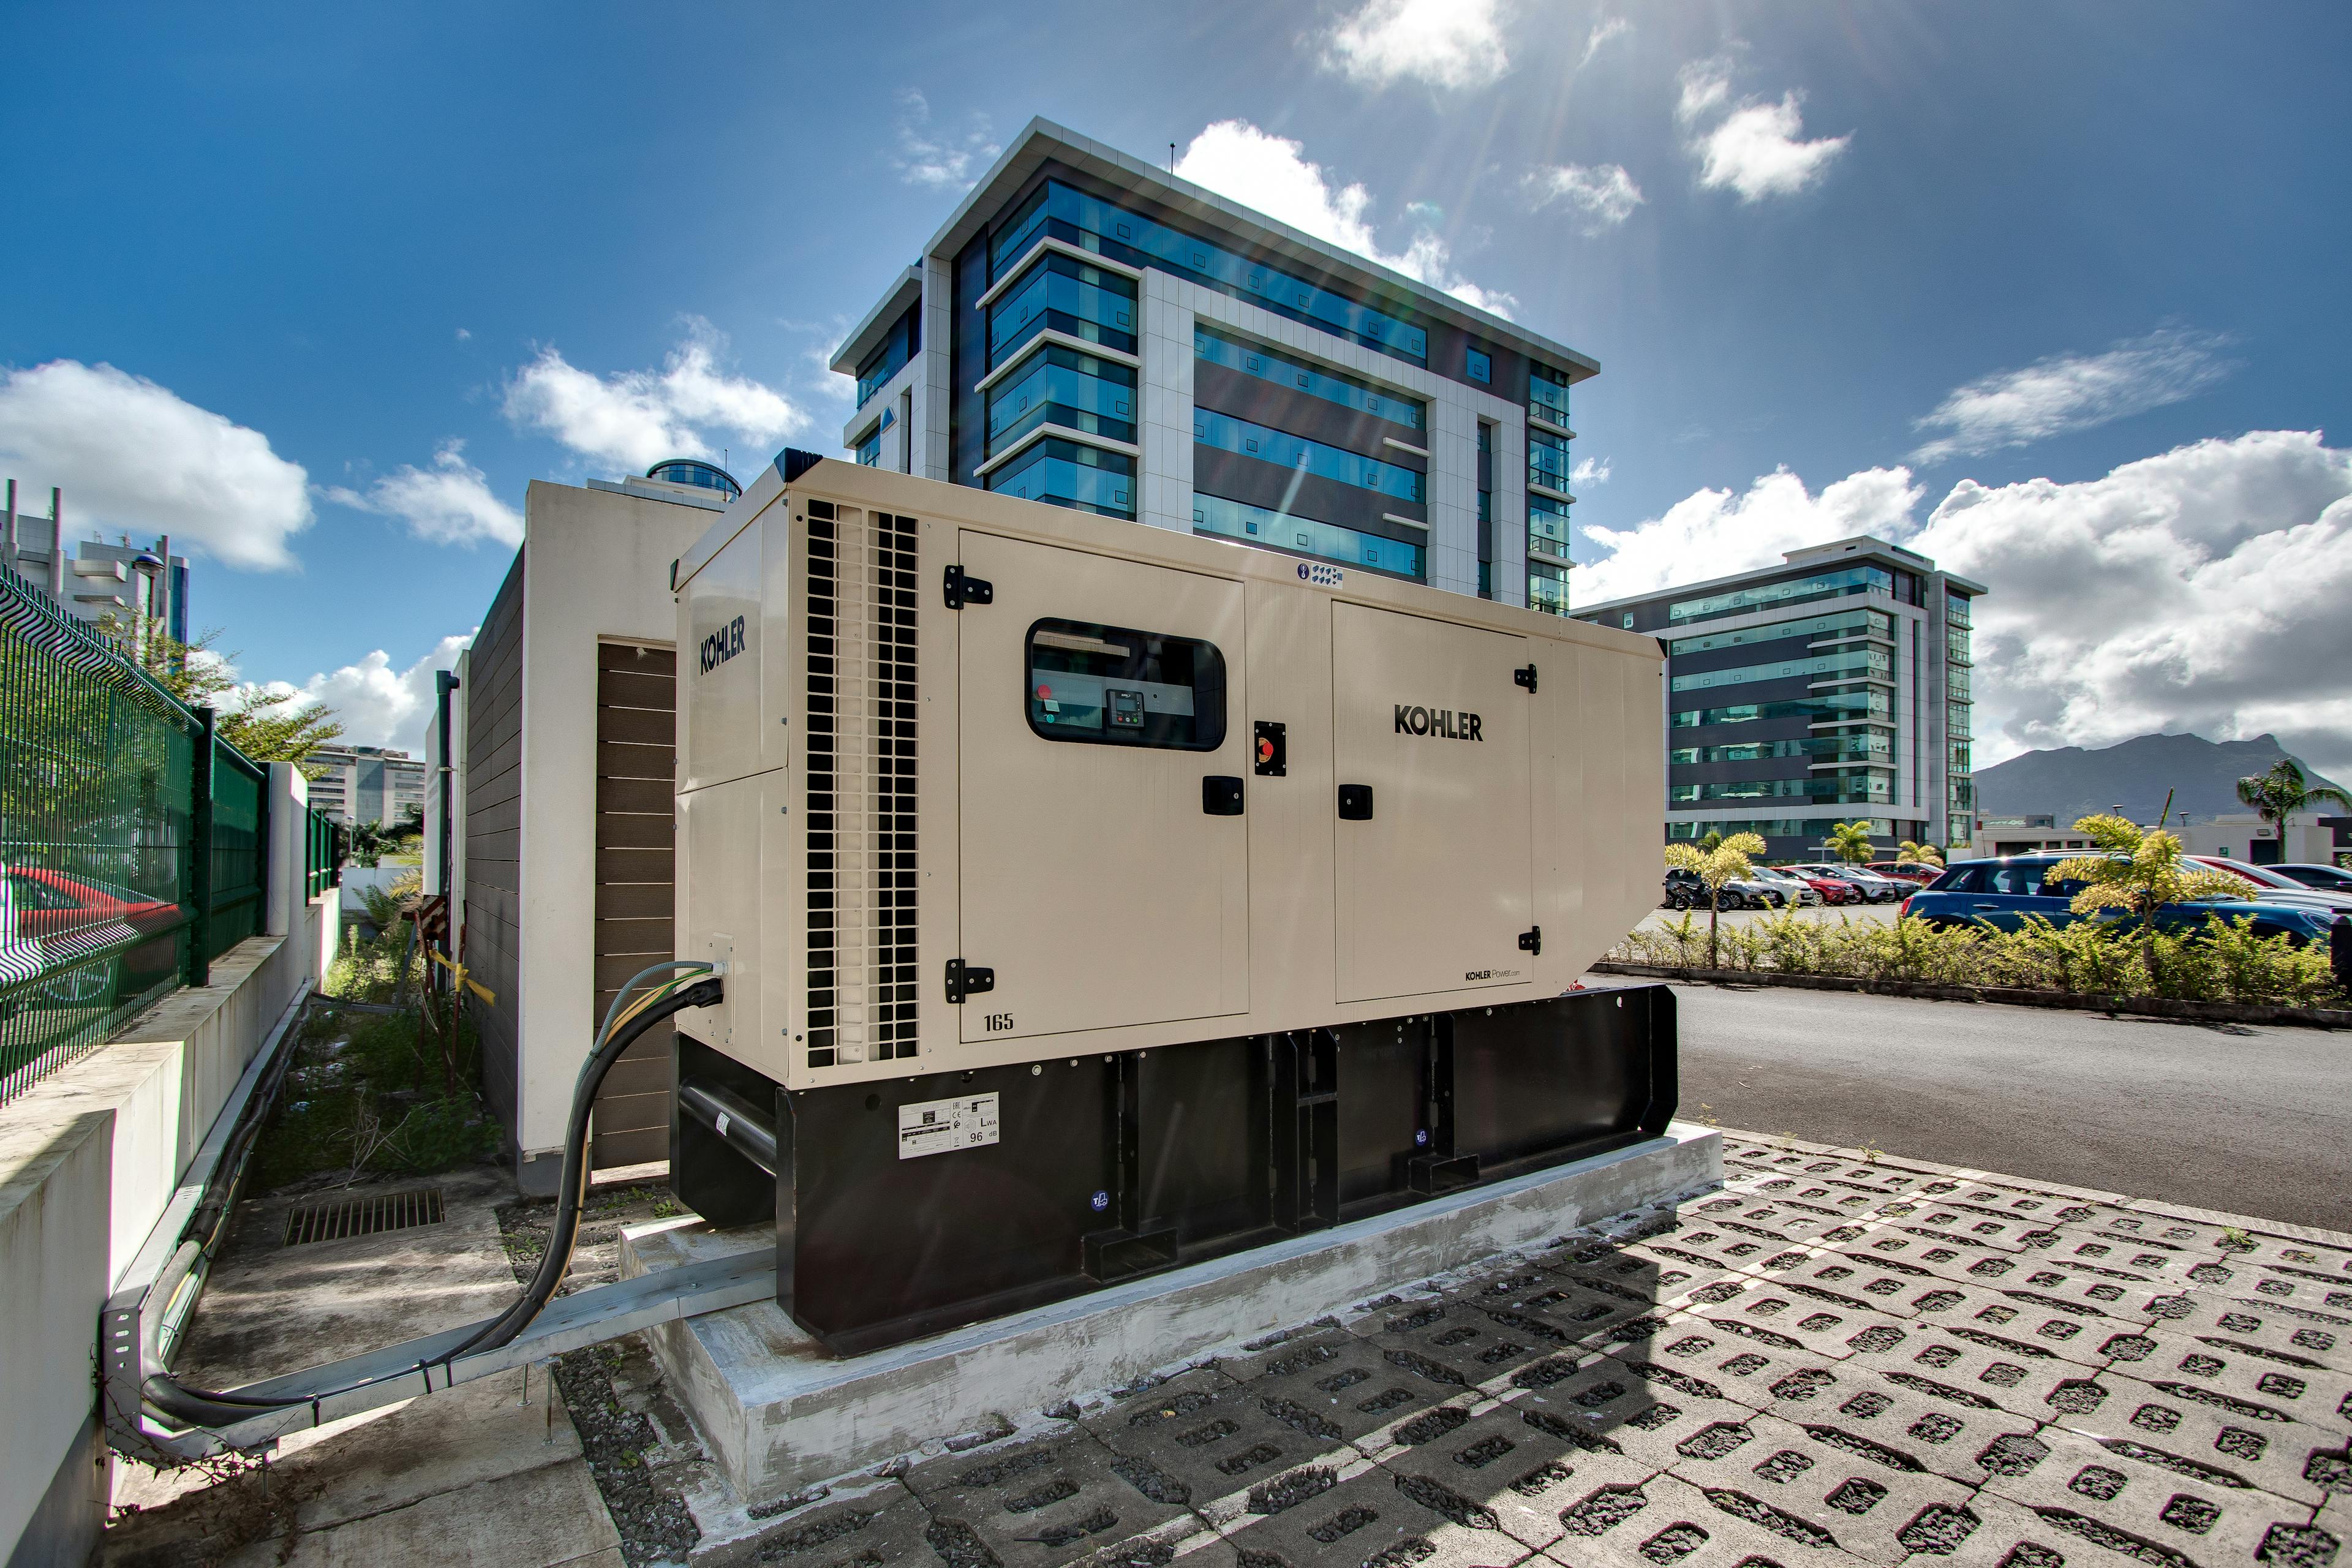 Standard enclosed generator set installed at a customer site